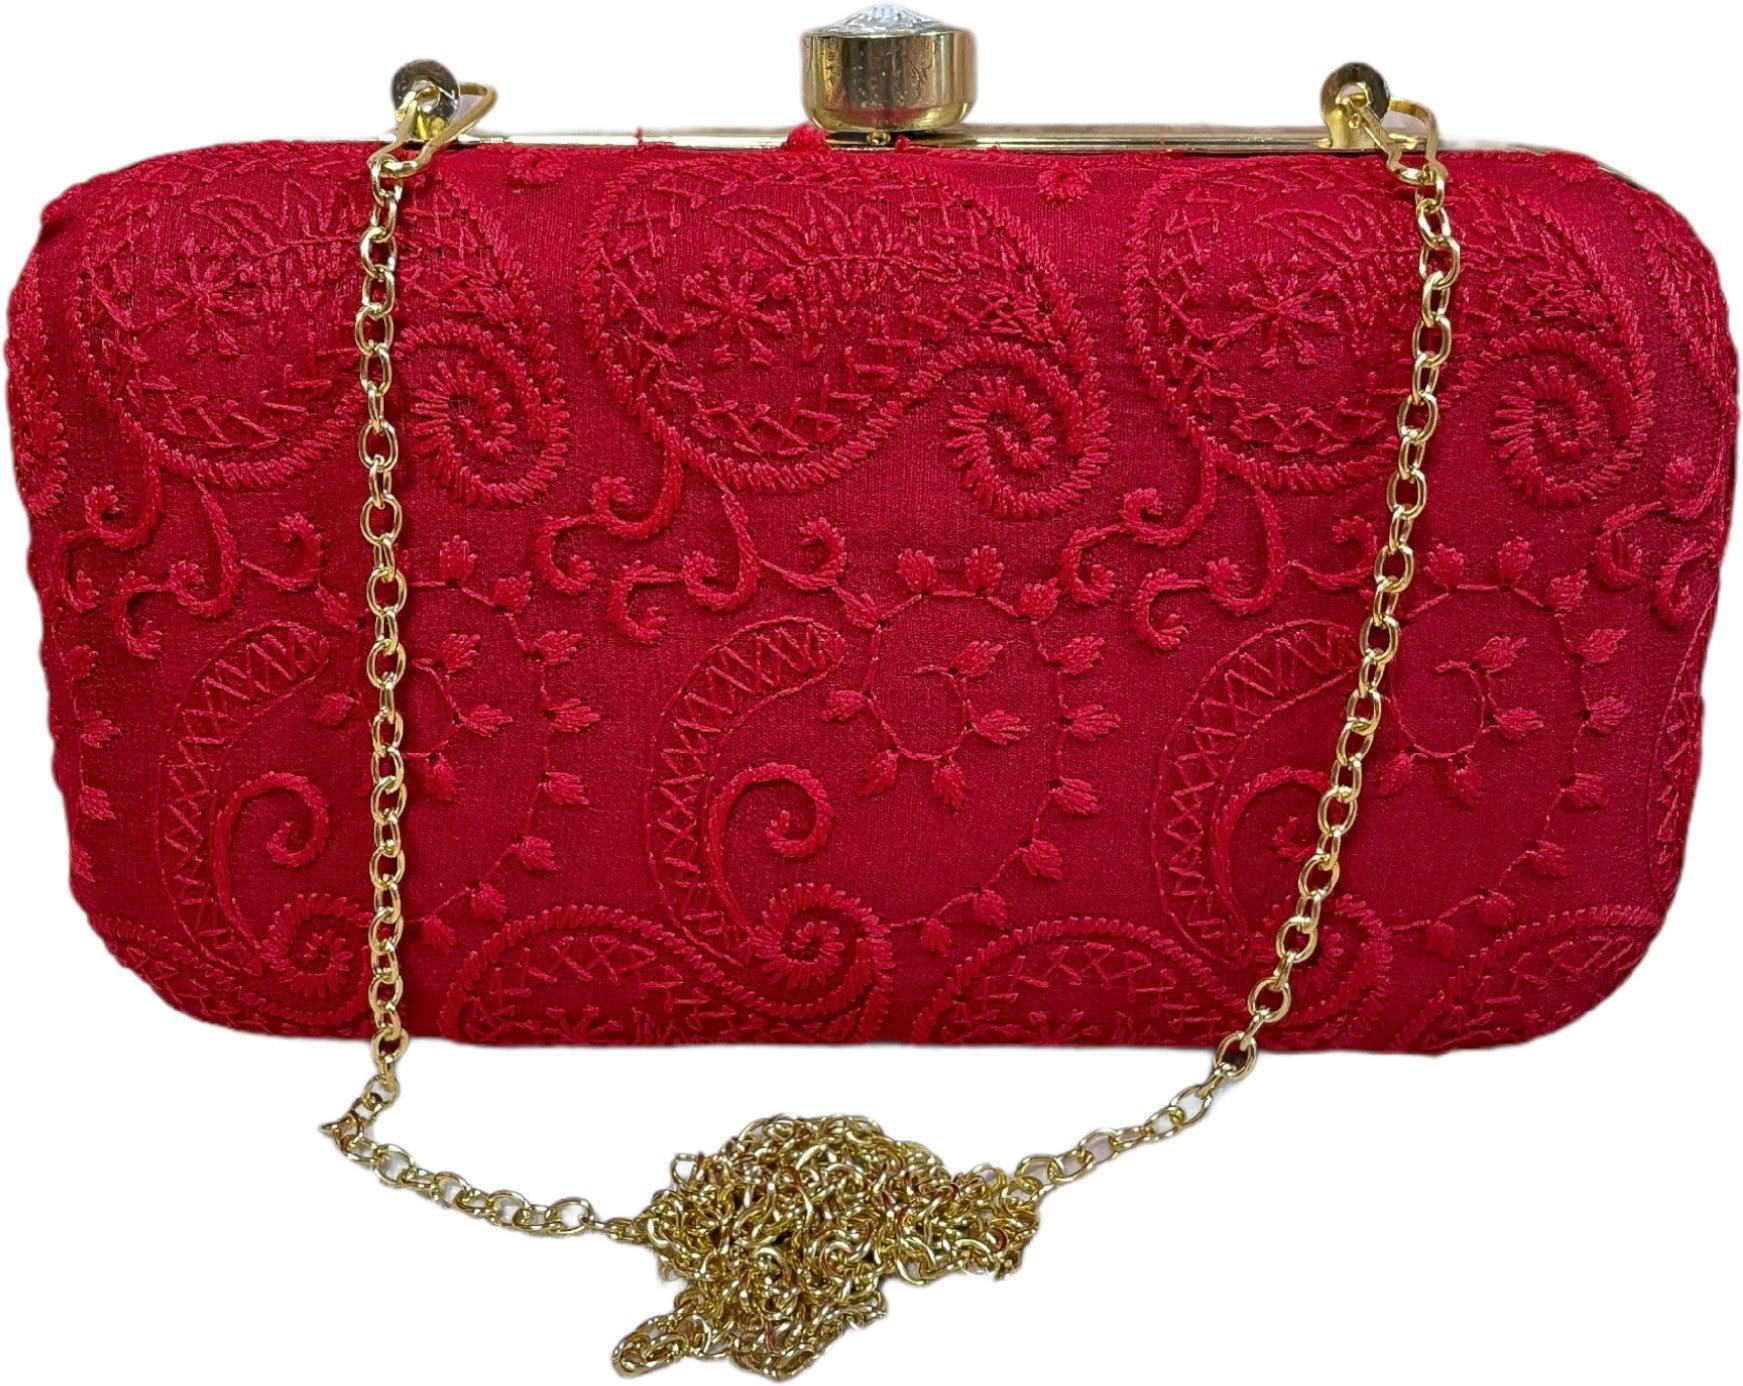 Party Wear Clutch Purses Manufacturer Exporter from Jaipur India